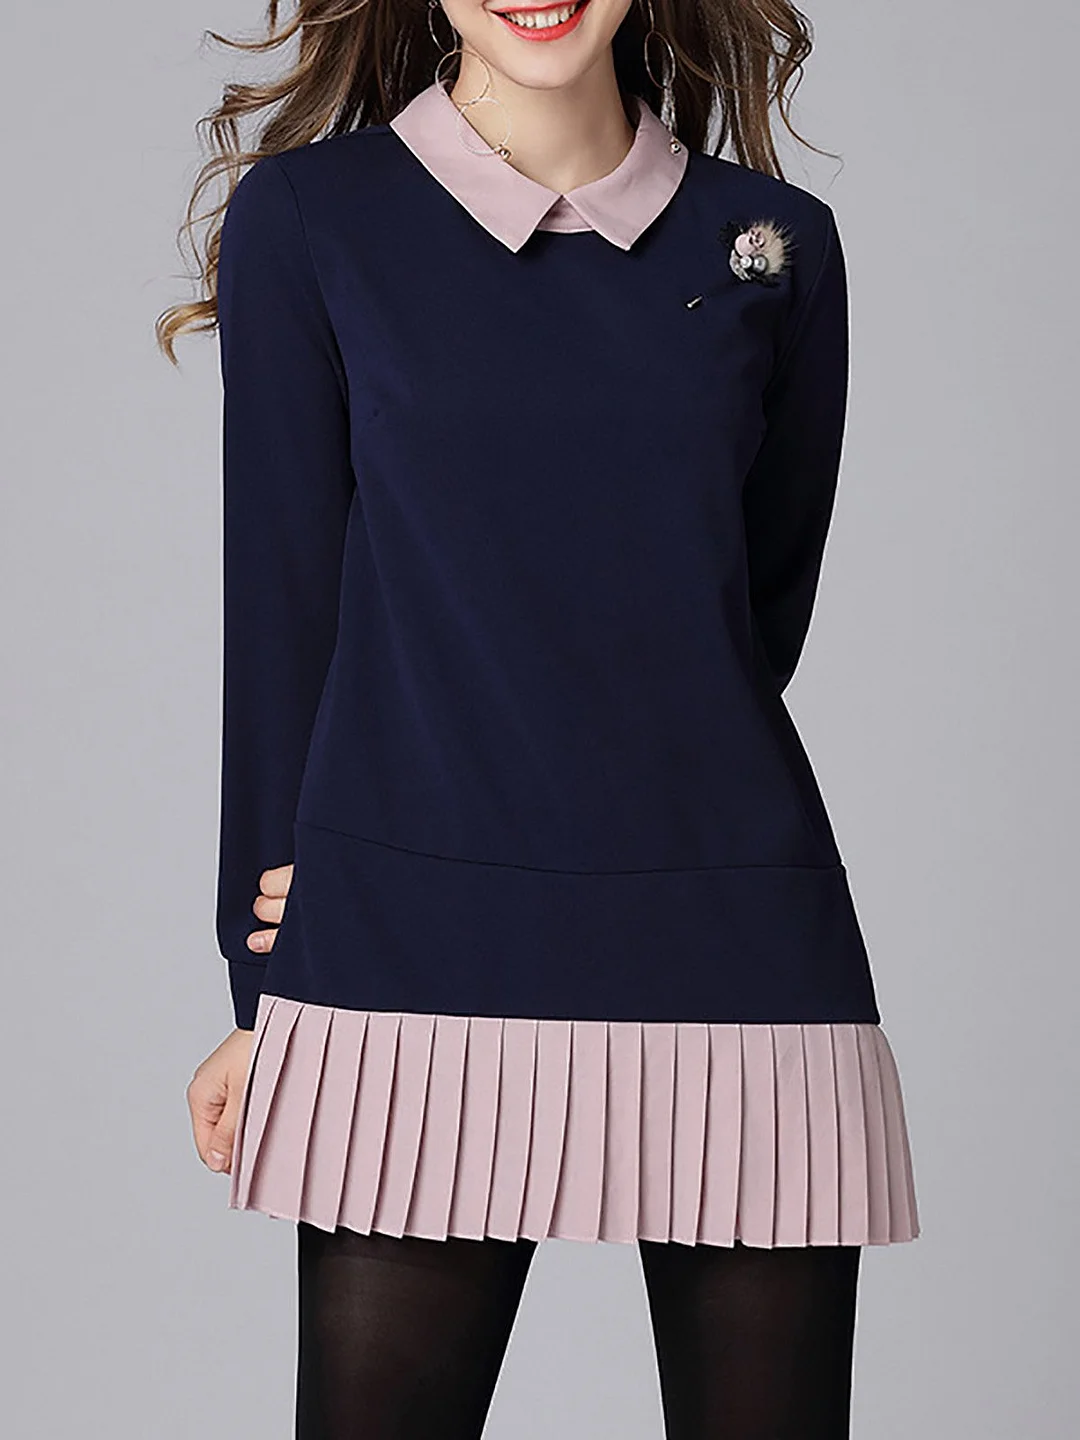 Navy Blue Long Sleeve Solid Tunic